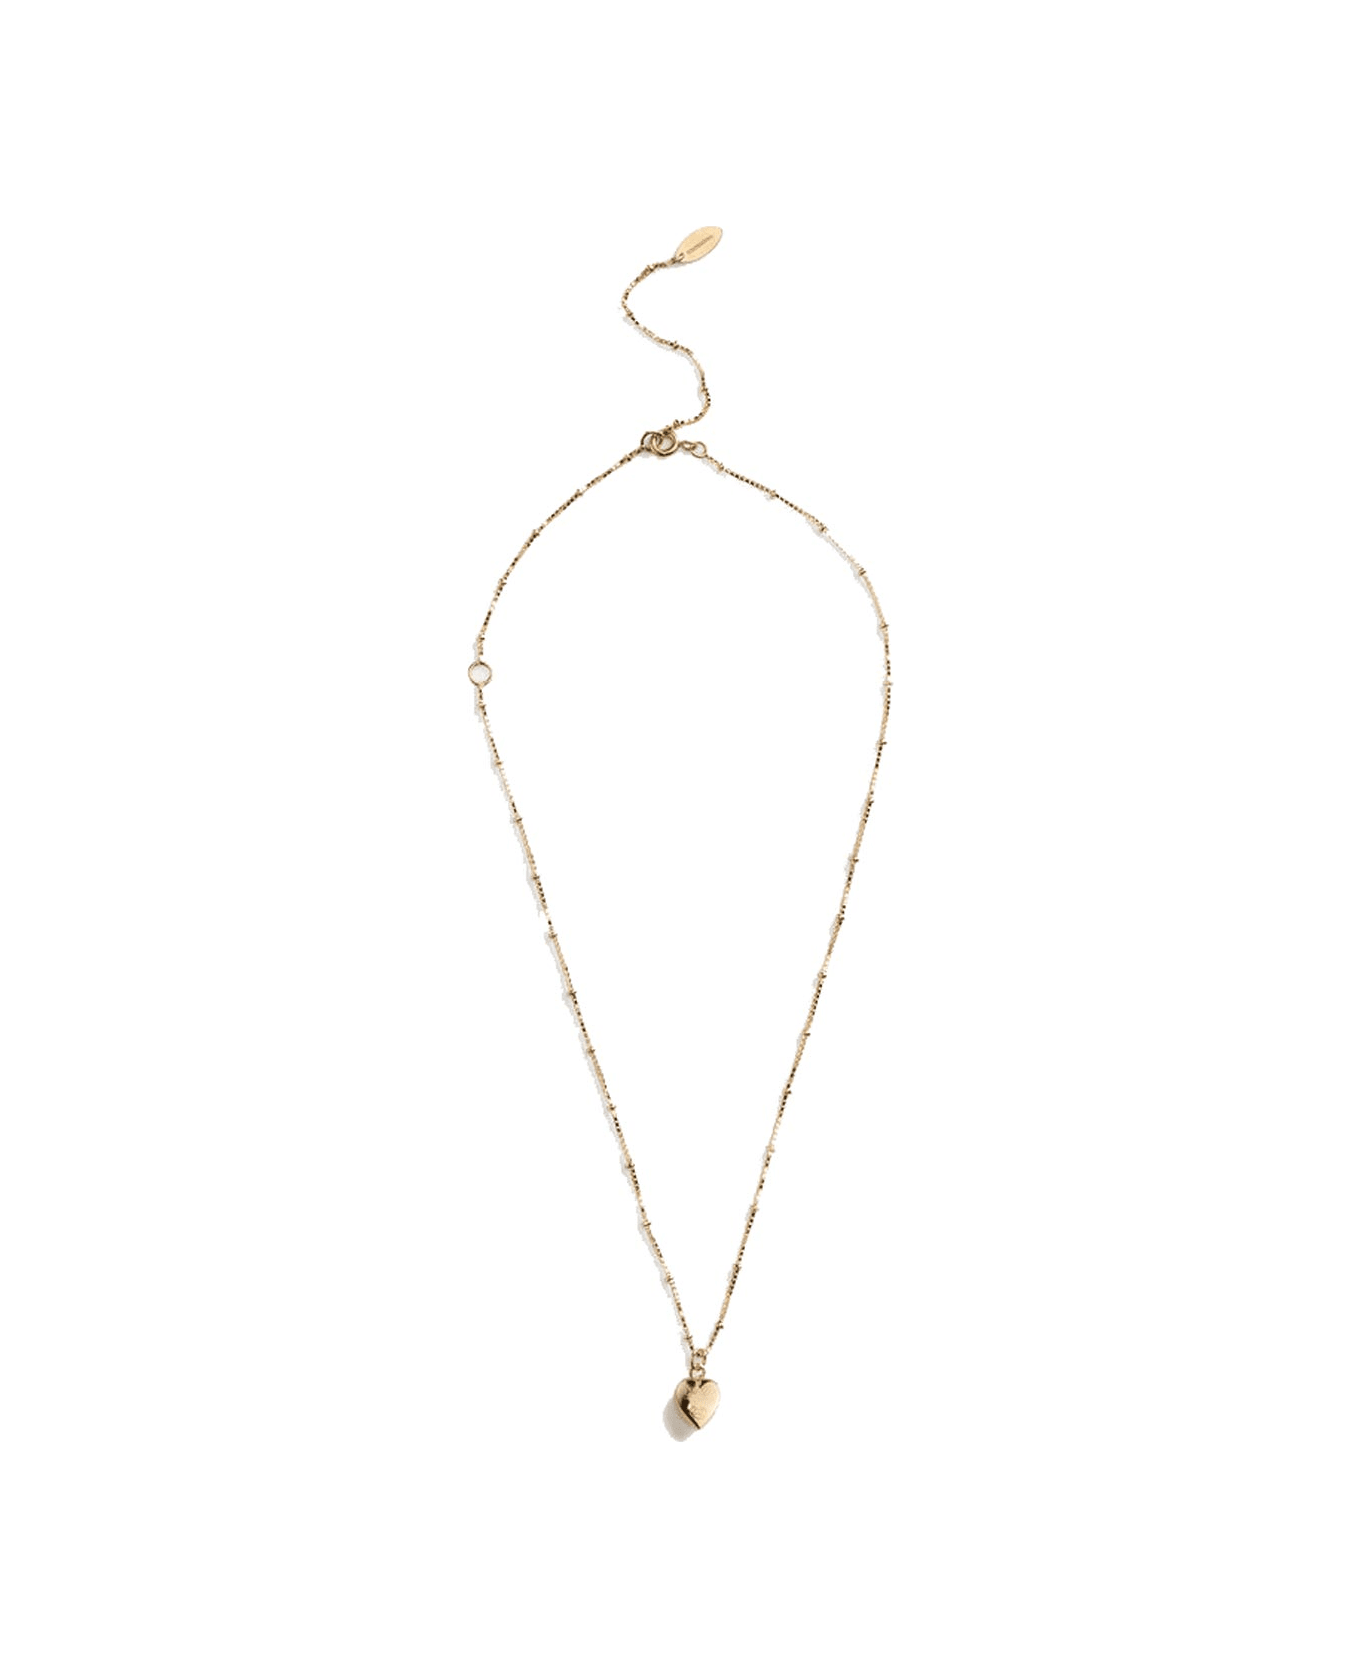 Dolce & Gabbana Necklace With Heart Charm - Gold アクセサリー＆ギフト